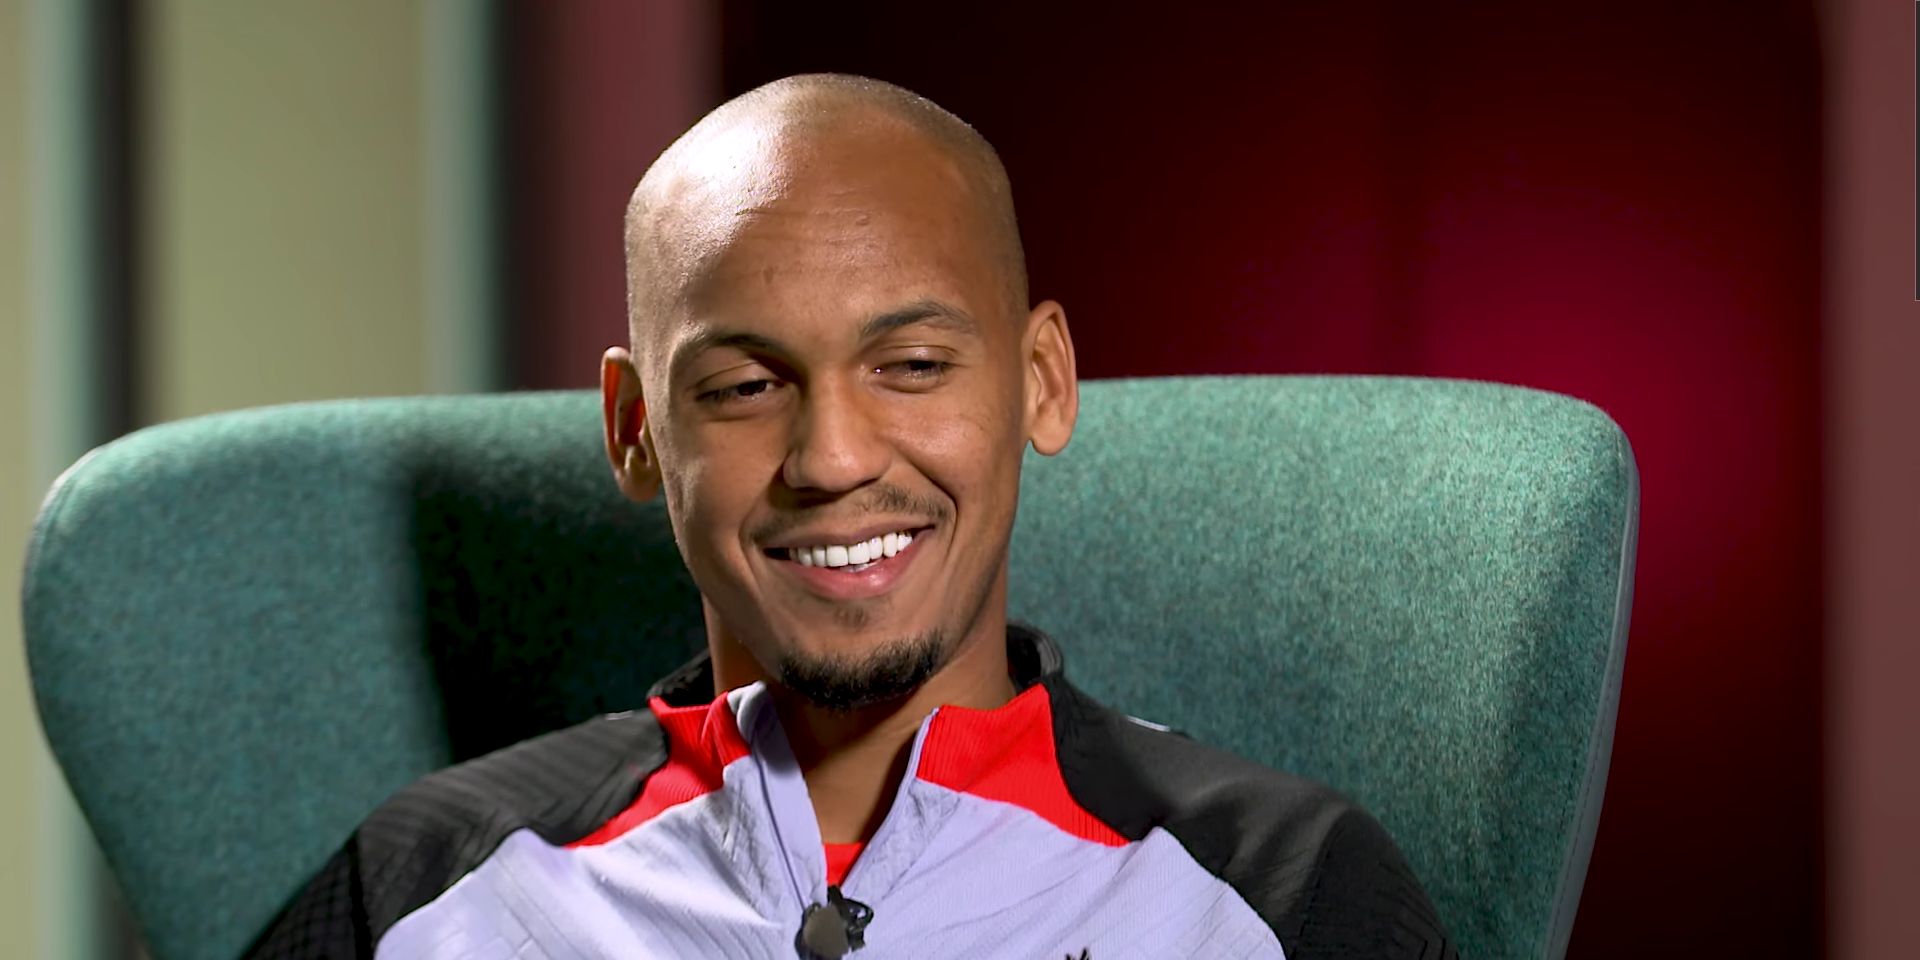 (Video) Fabinho revisits his hilarious attempt at Scouse accent with “do you want some chicken lad!?”